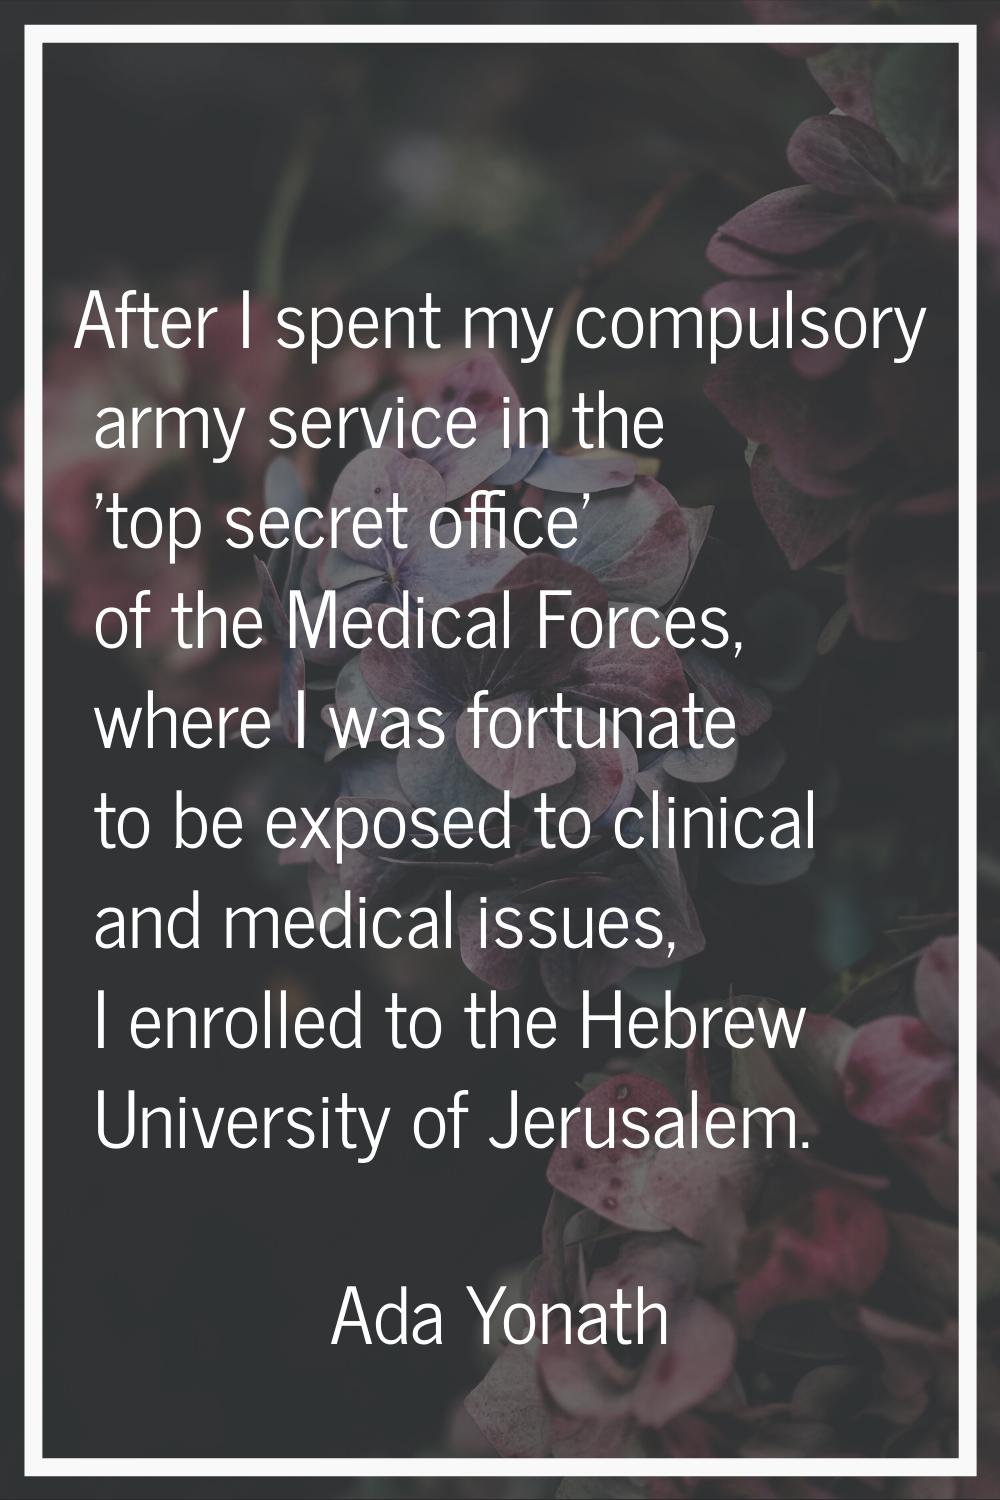 After I spent my compulsory army service in the 'top secret office' of the Medical Forces, where I 